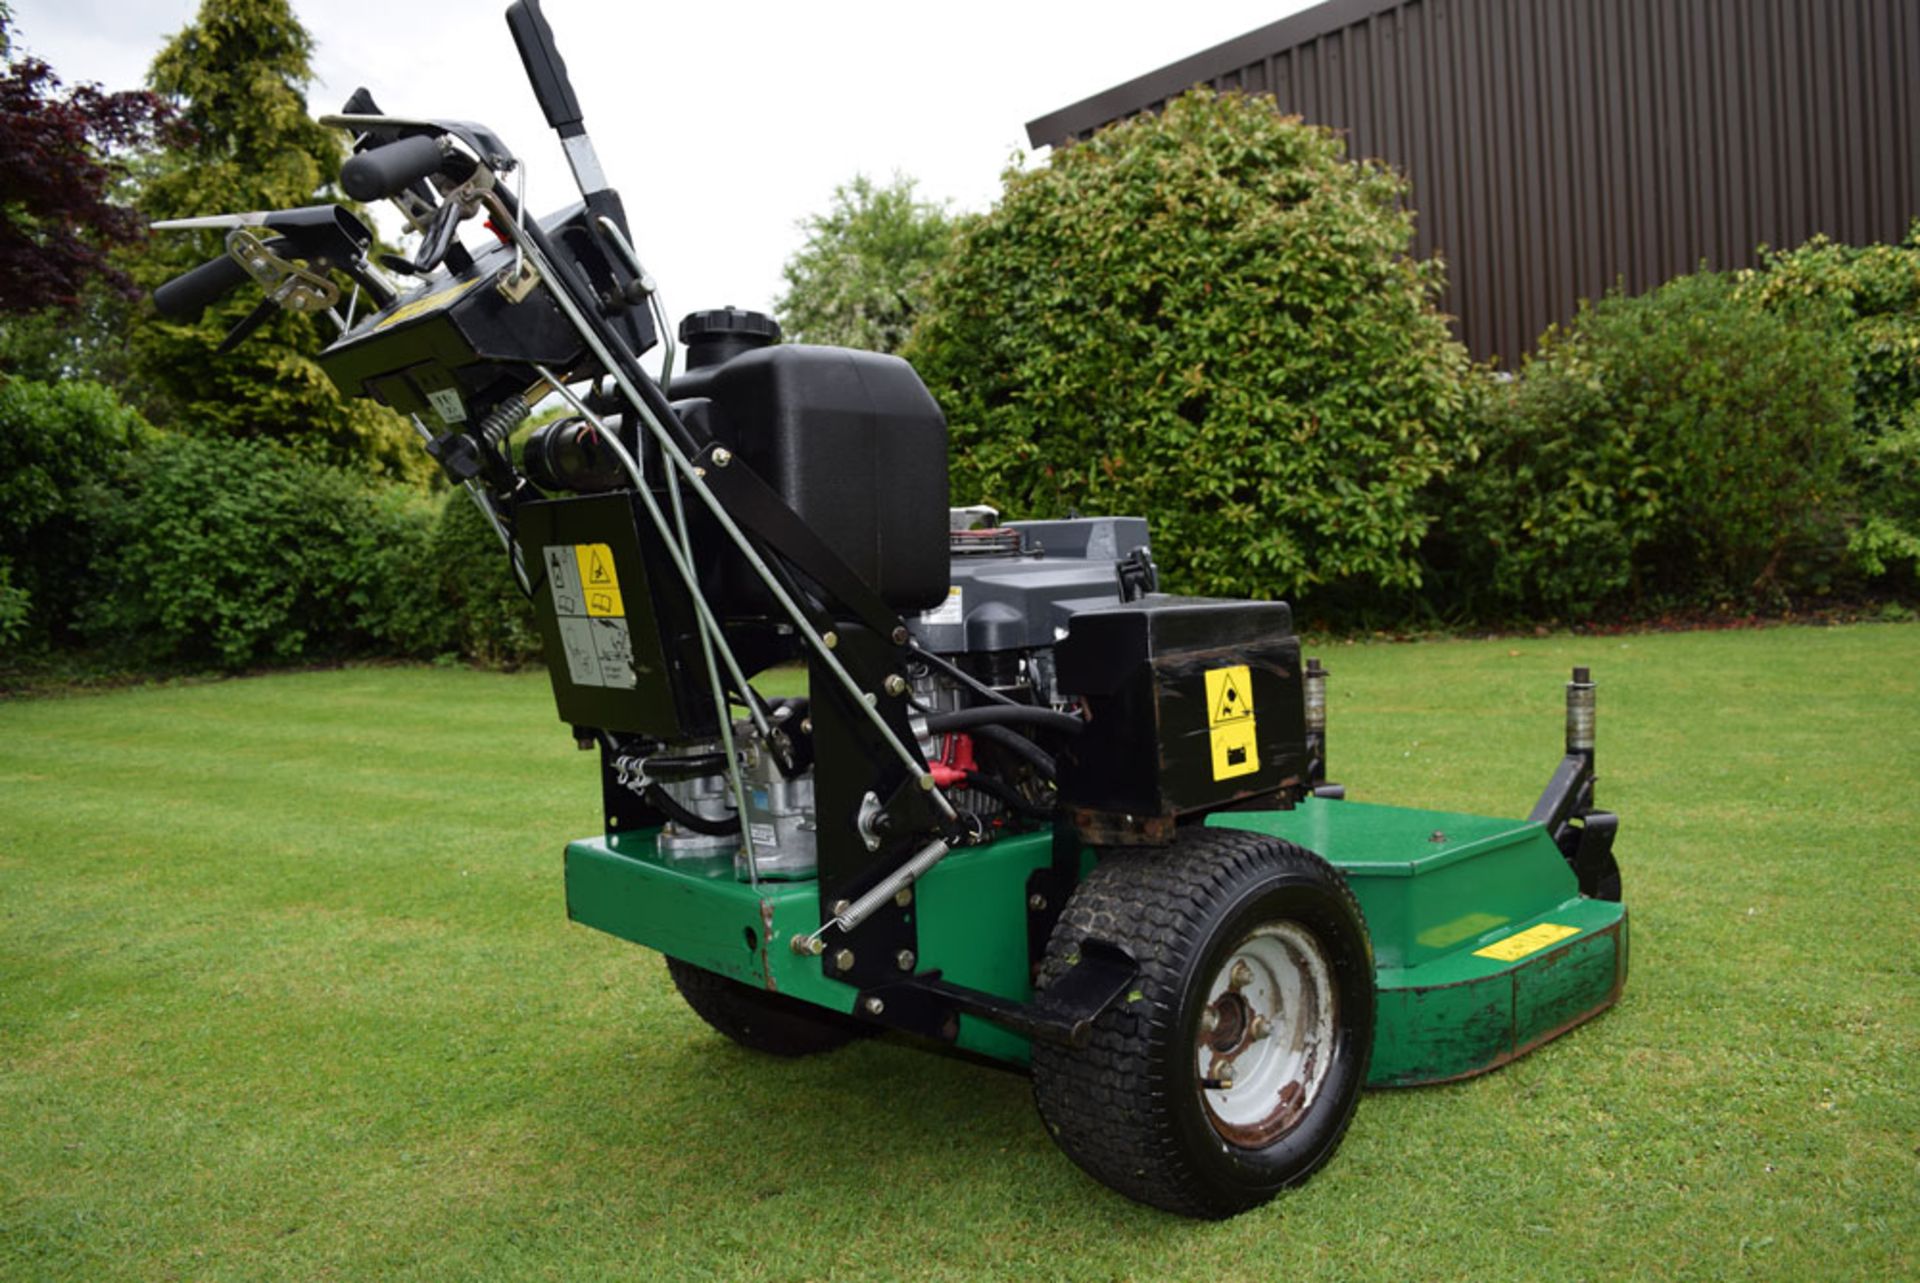 2008 Ransomes Pedestrian 36"""" Commercial Walk Behind Zero Turn Rotary Mower - Image 6 of 9